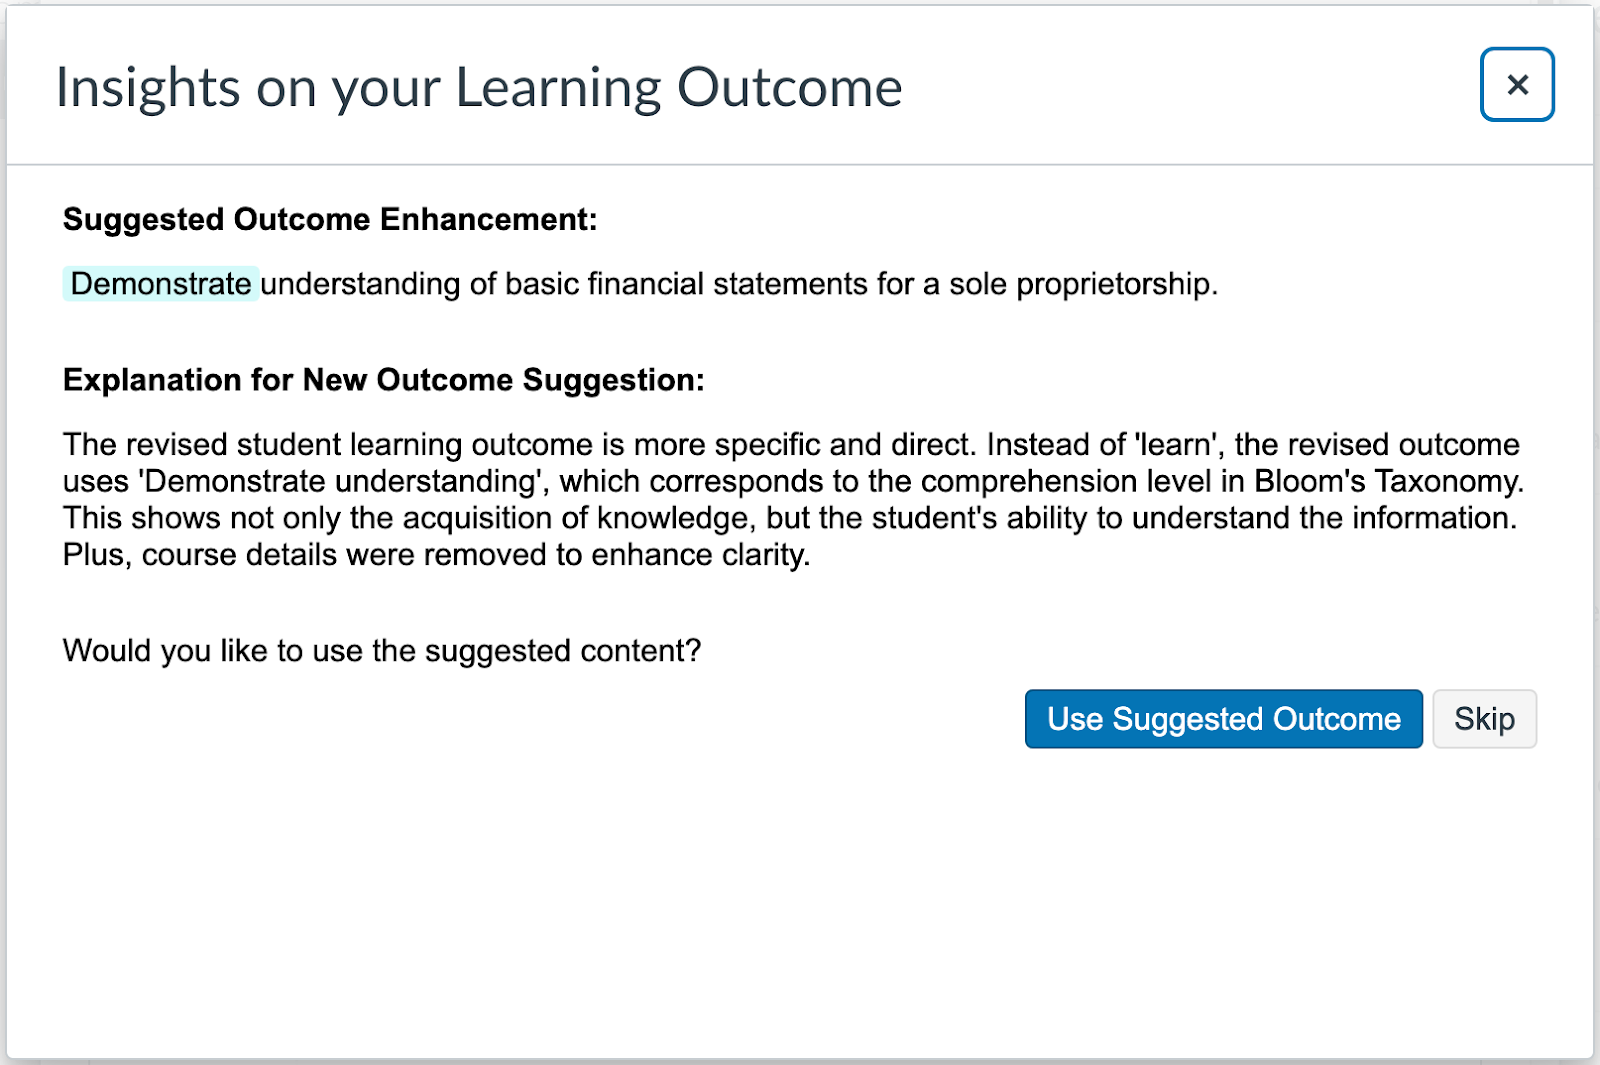 Insights on your Learning Outcome